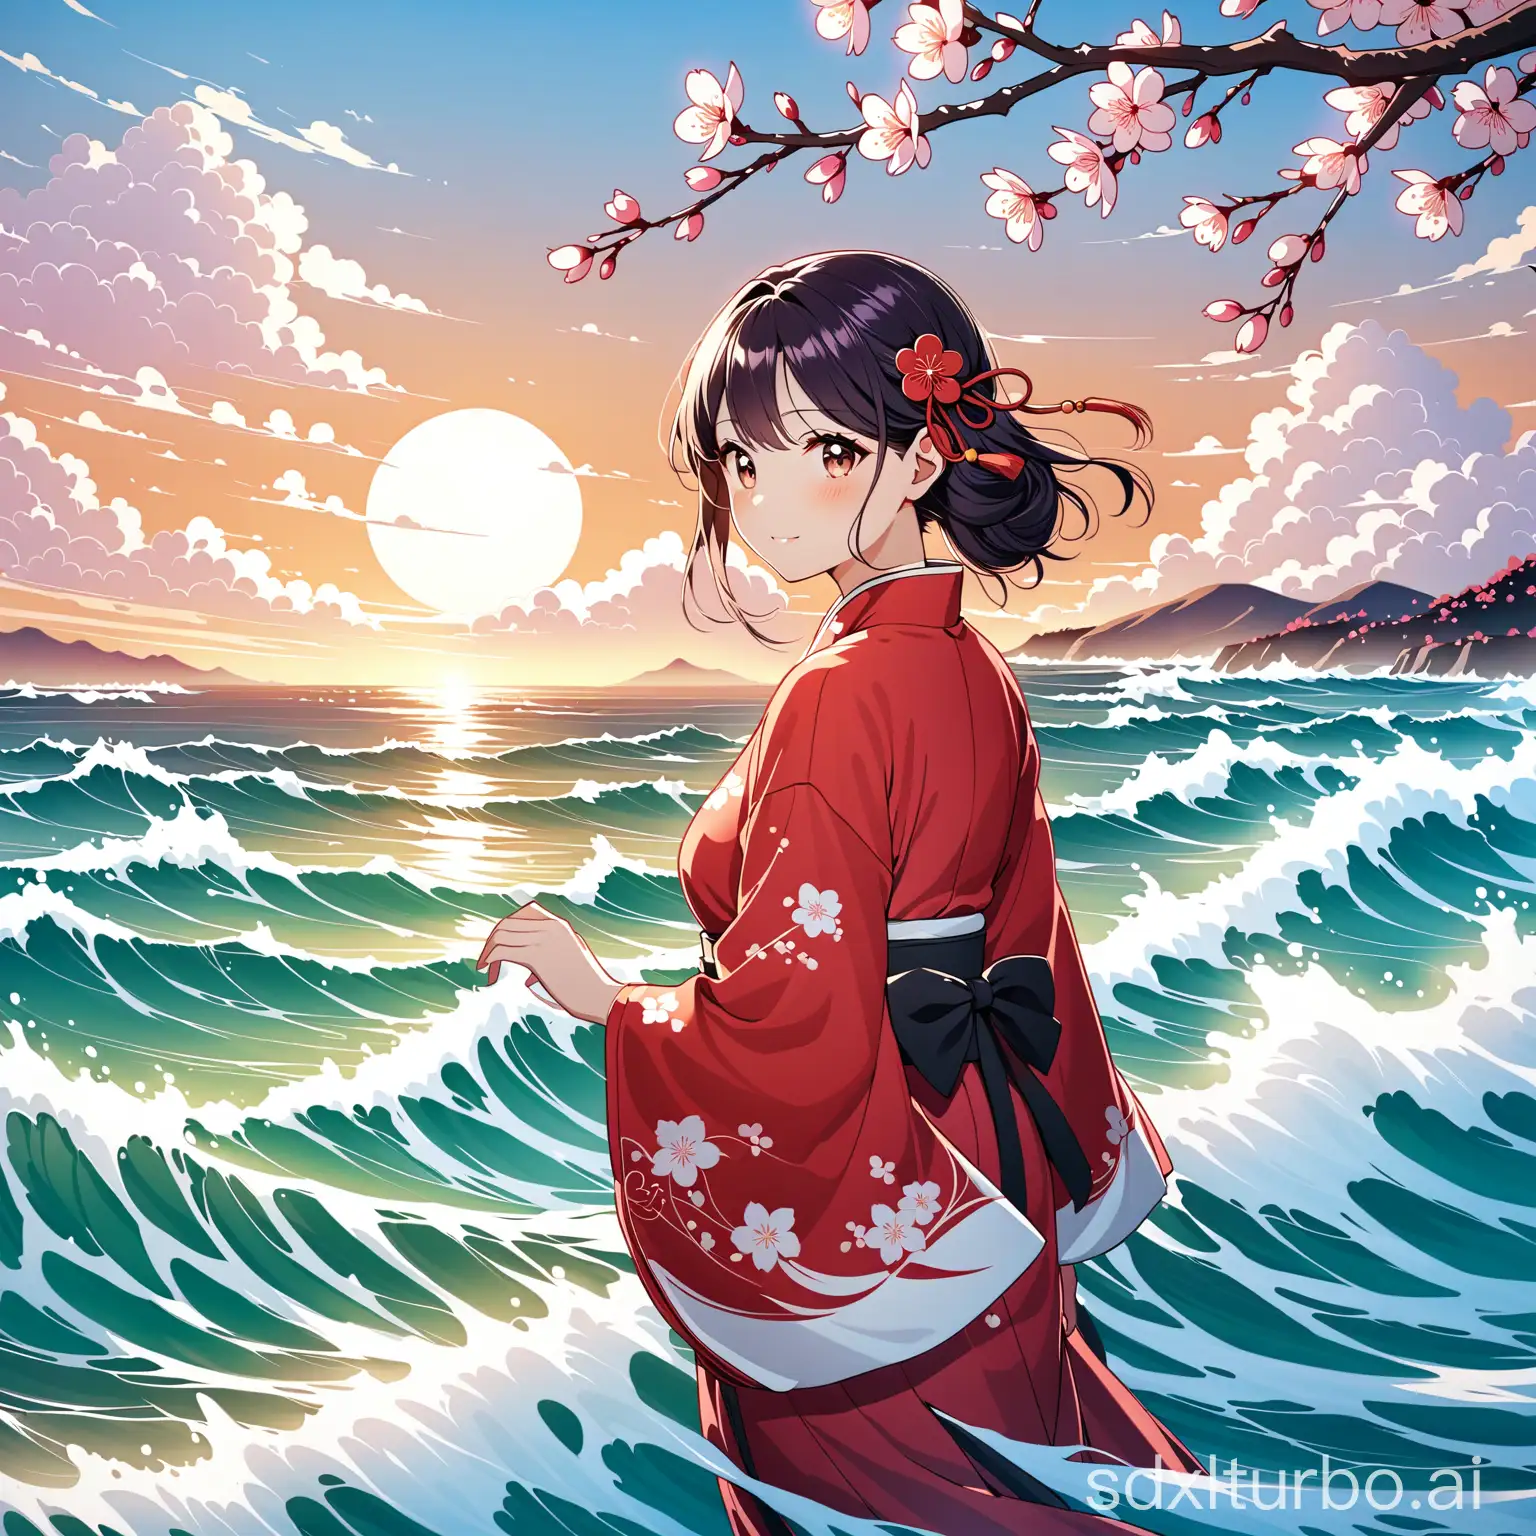 Tranquil-Girl-Amidst-Plum-Blossoms-White-Clouds-and-Gentle-Waves